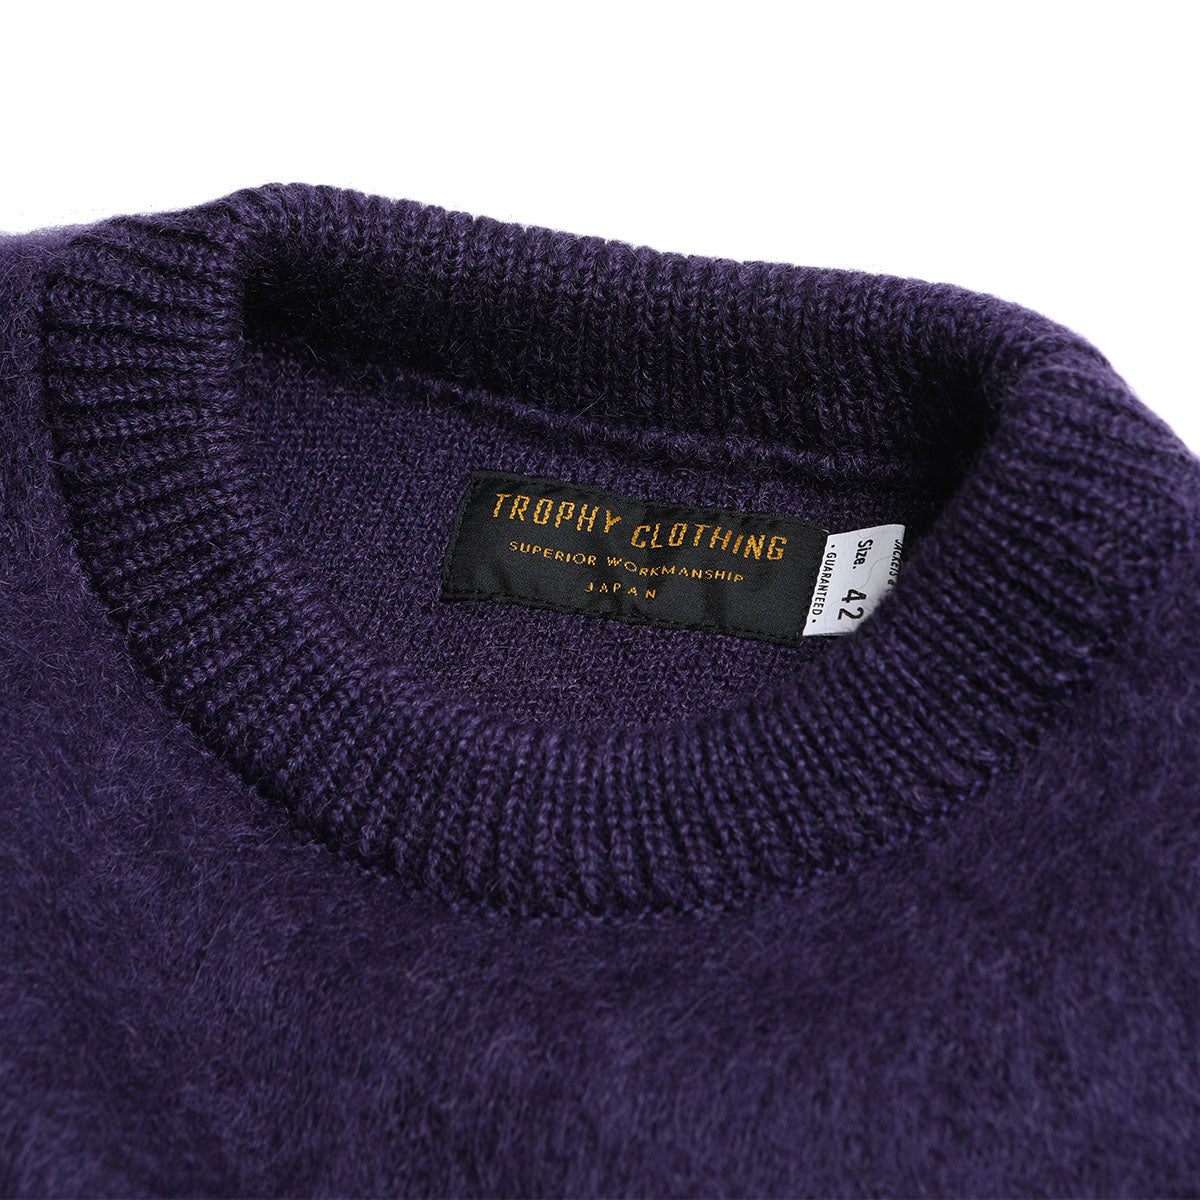 Mohair Knit Crew Neck Sweater / TR23AW-208